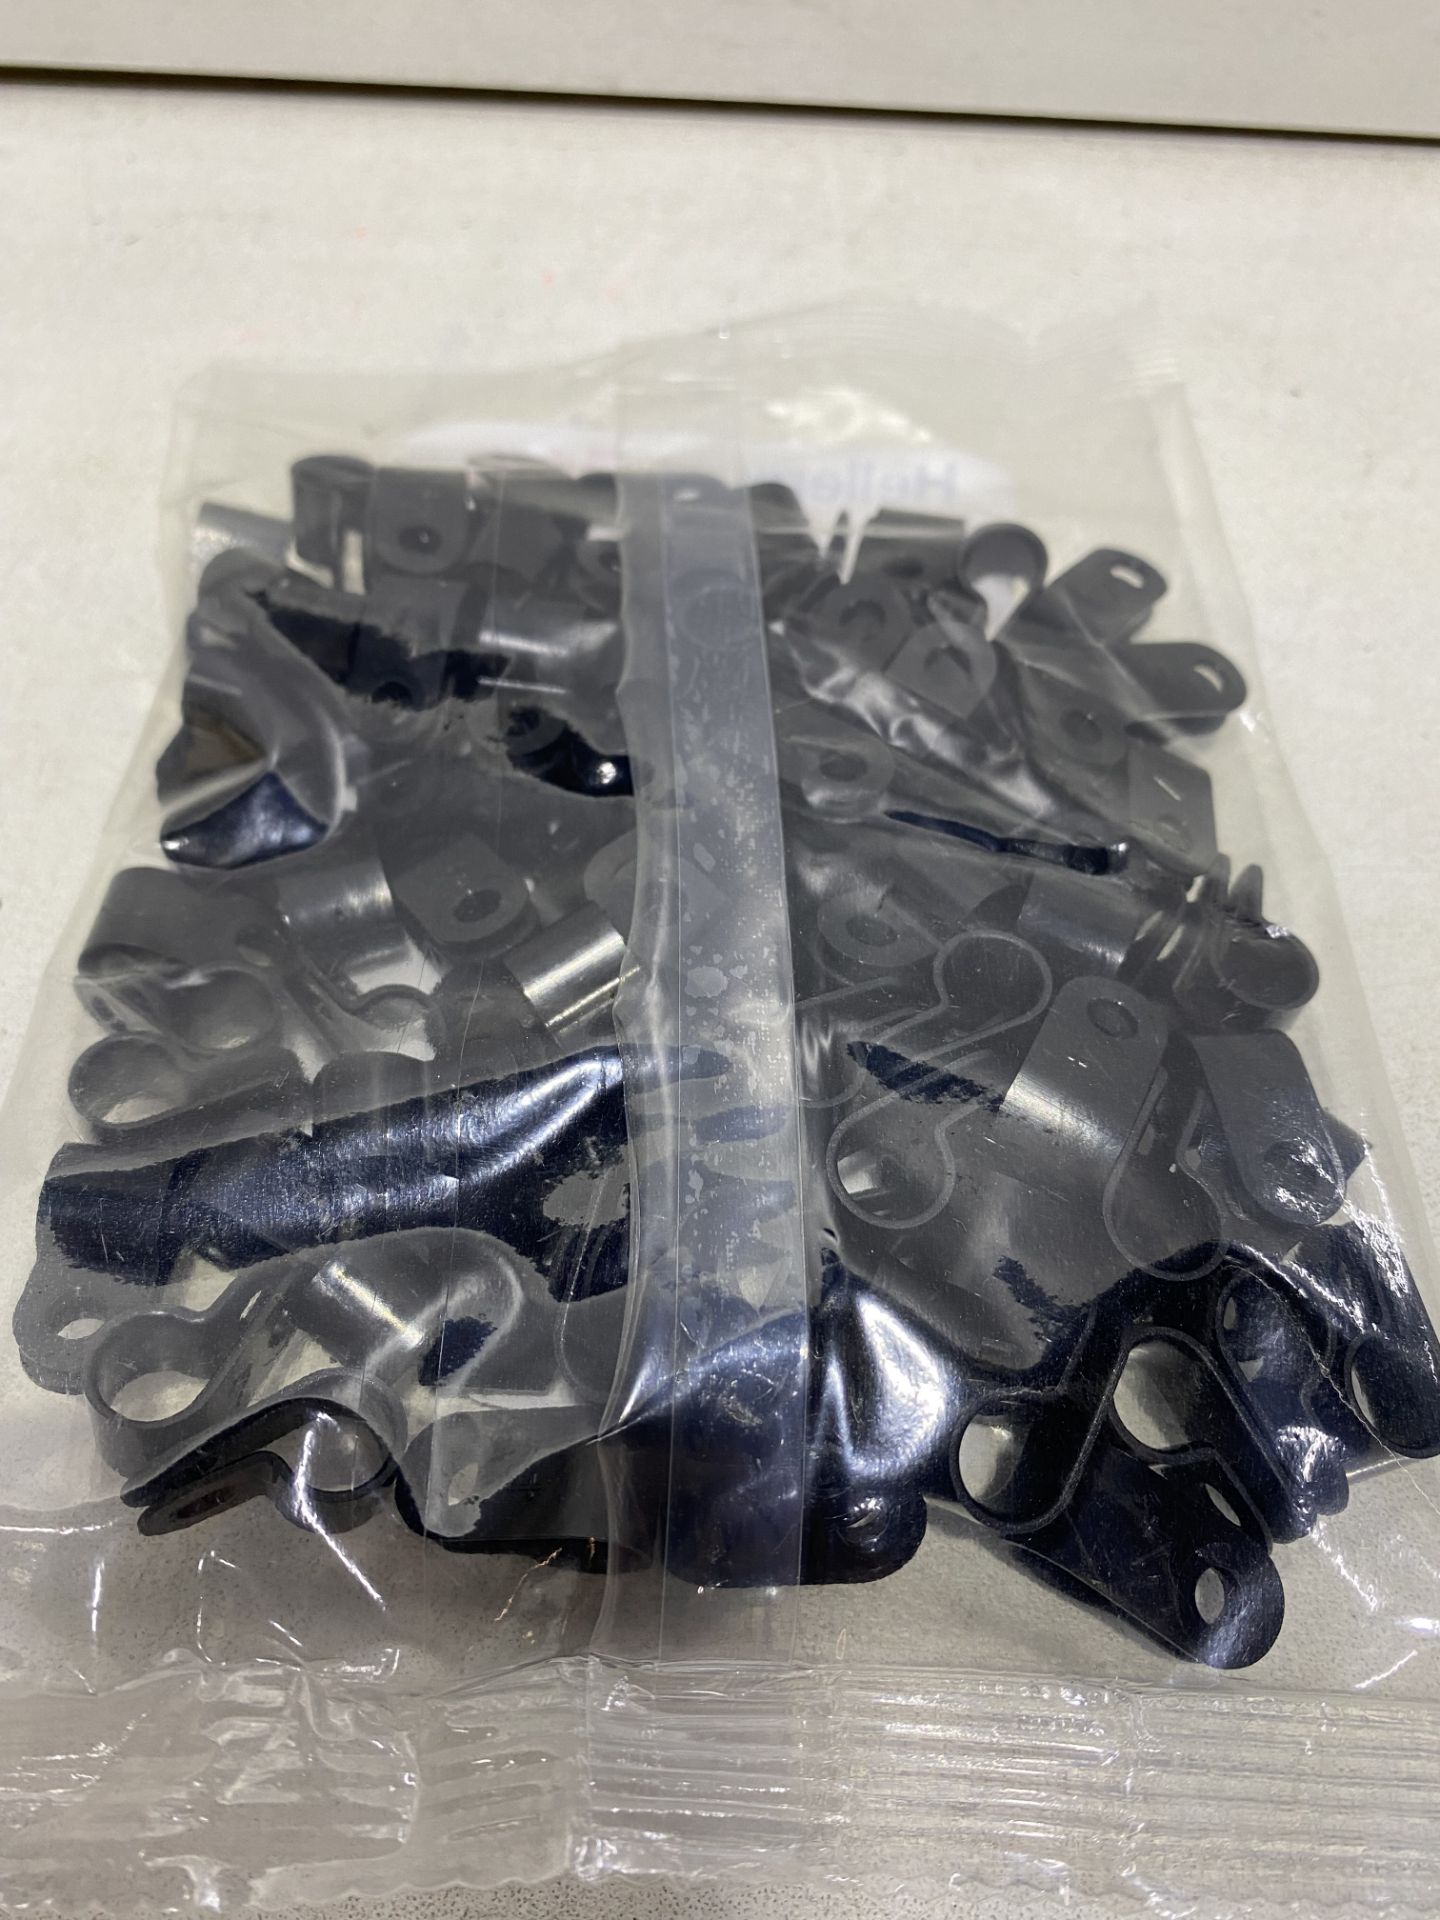 Approximately 10,000 x Hellermann Tyton 211-60003 Black Cable Clips/Clamps - Image 3 of 3